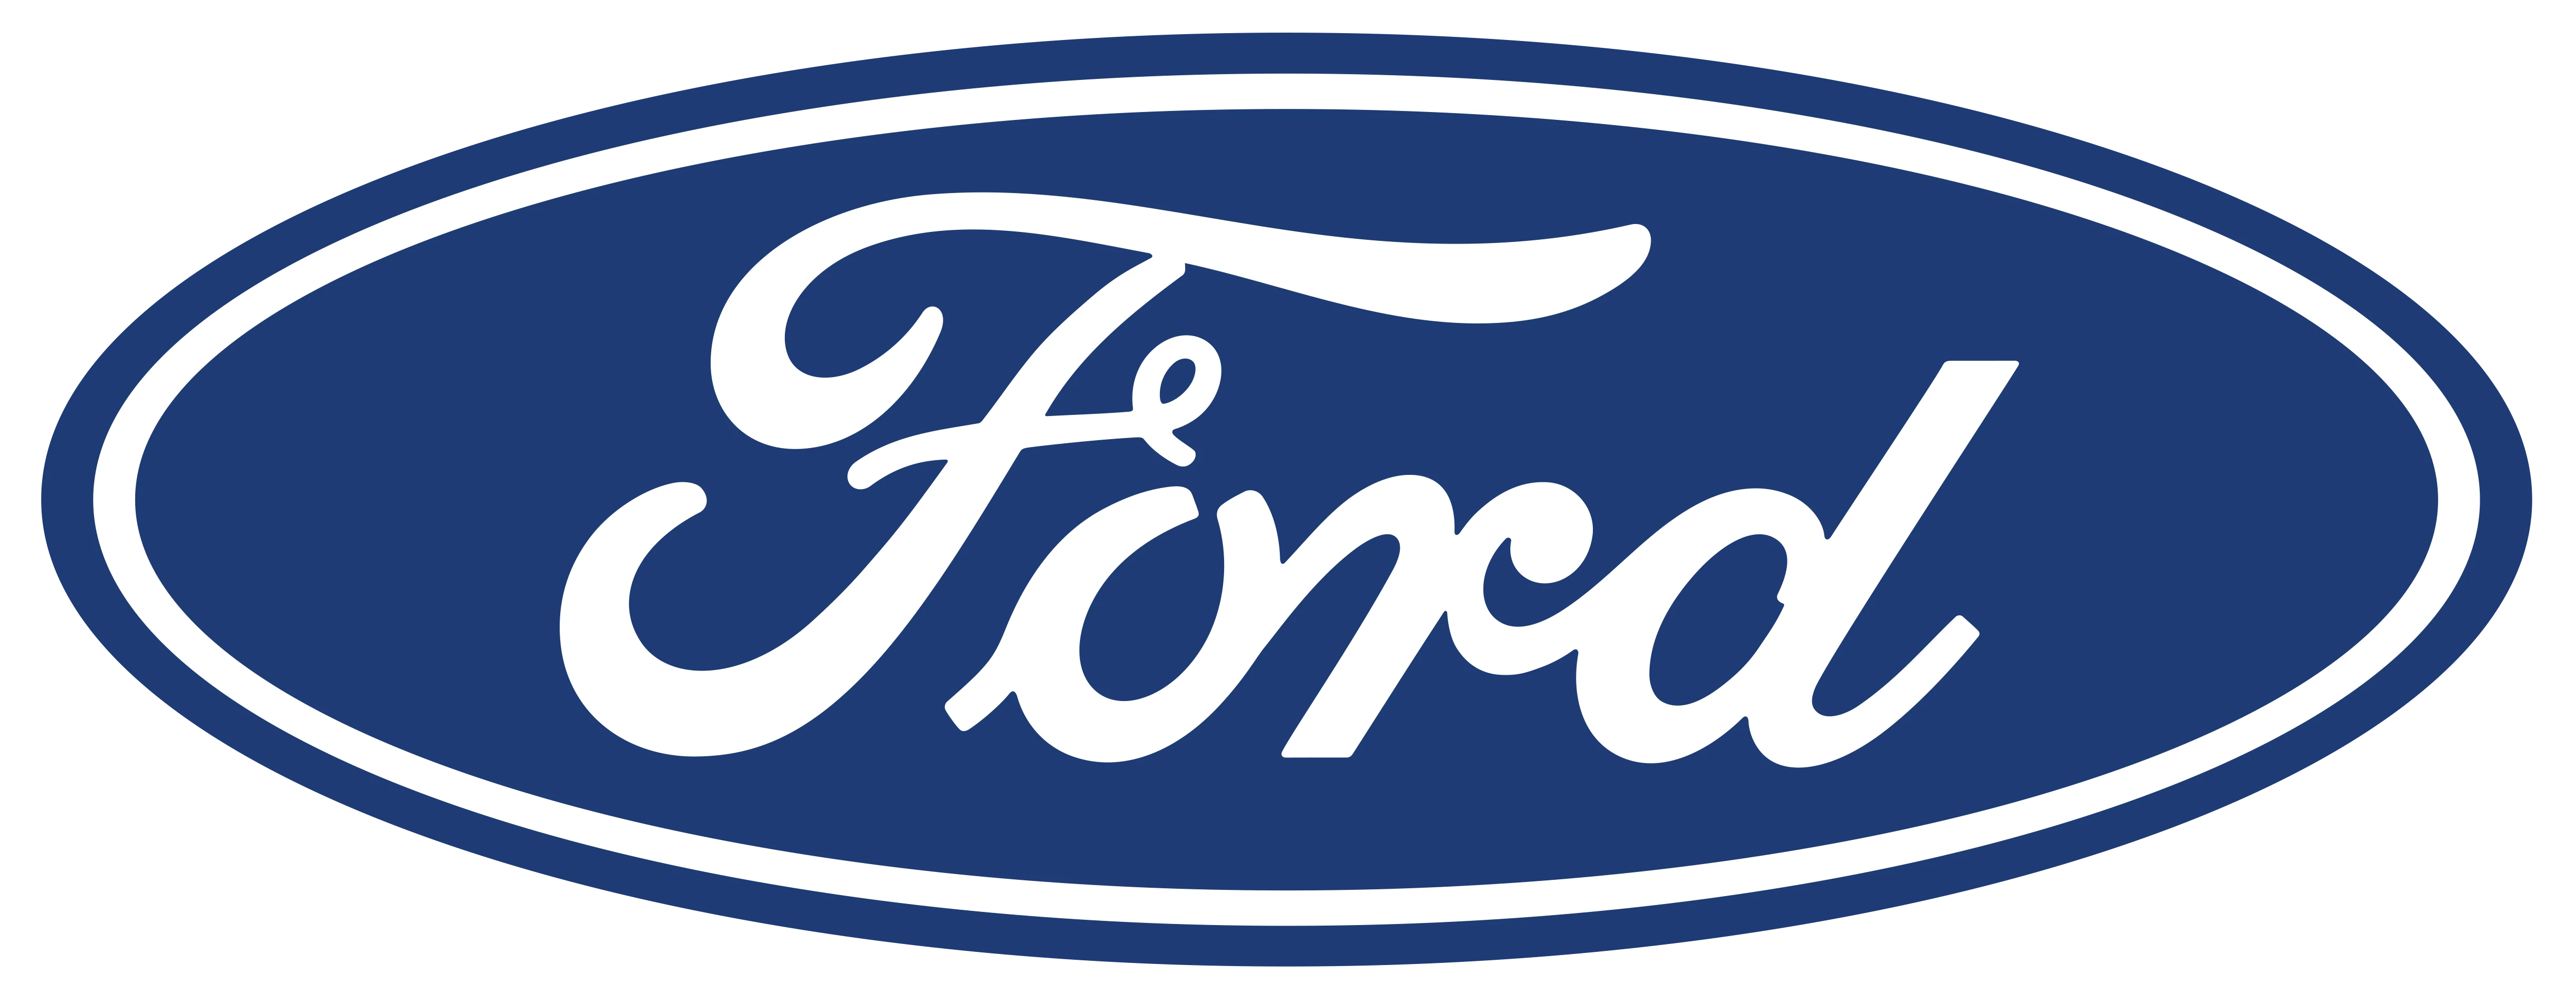 2437-ford-oval-cmyk-17128242017898.png